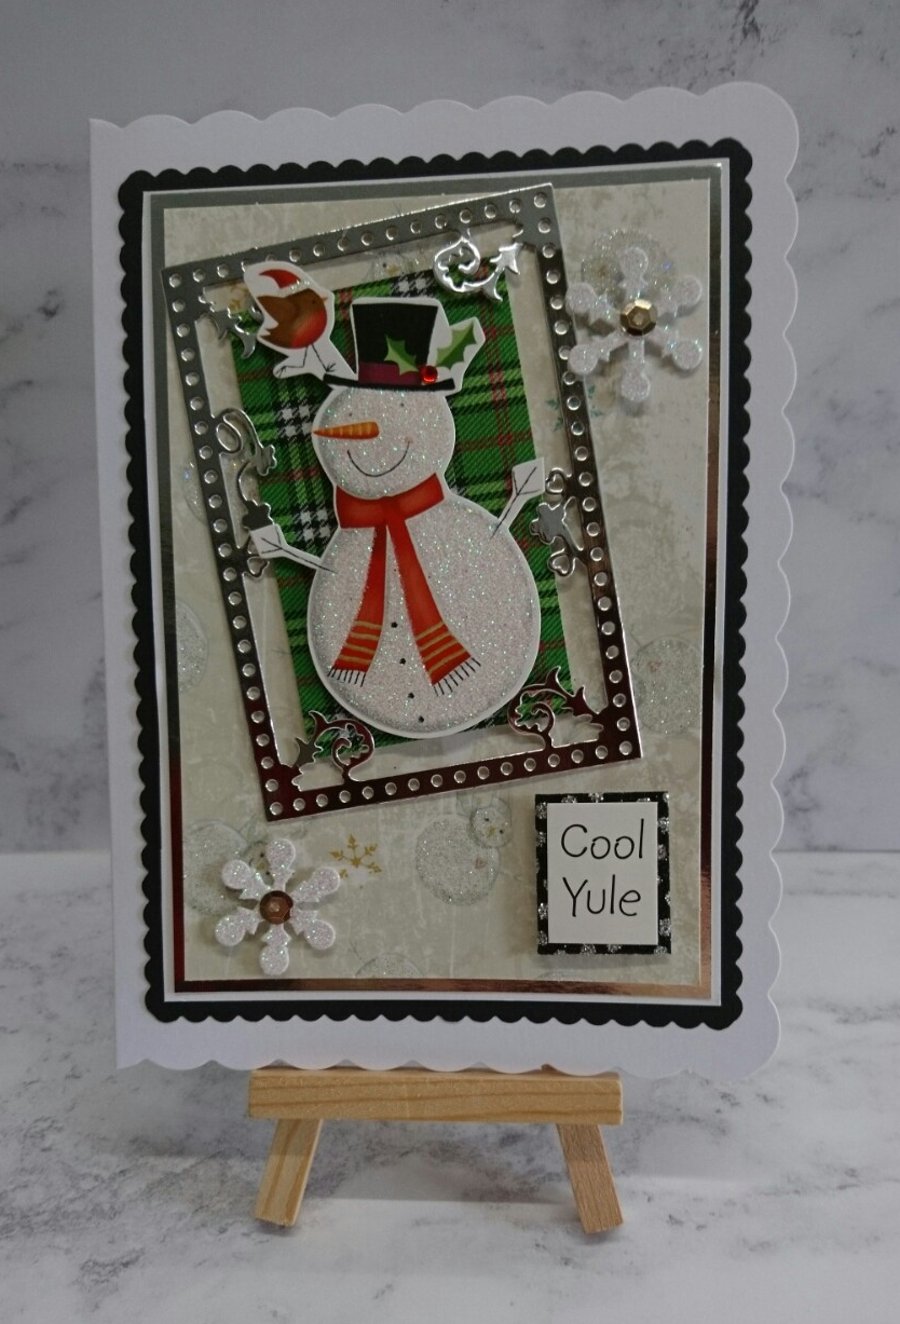 Handmade Christmas Card Cool Yule Snowman and Robin with Snowflakes